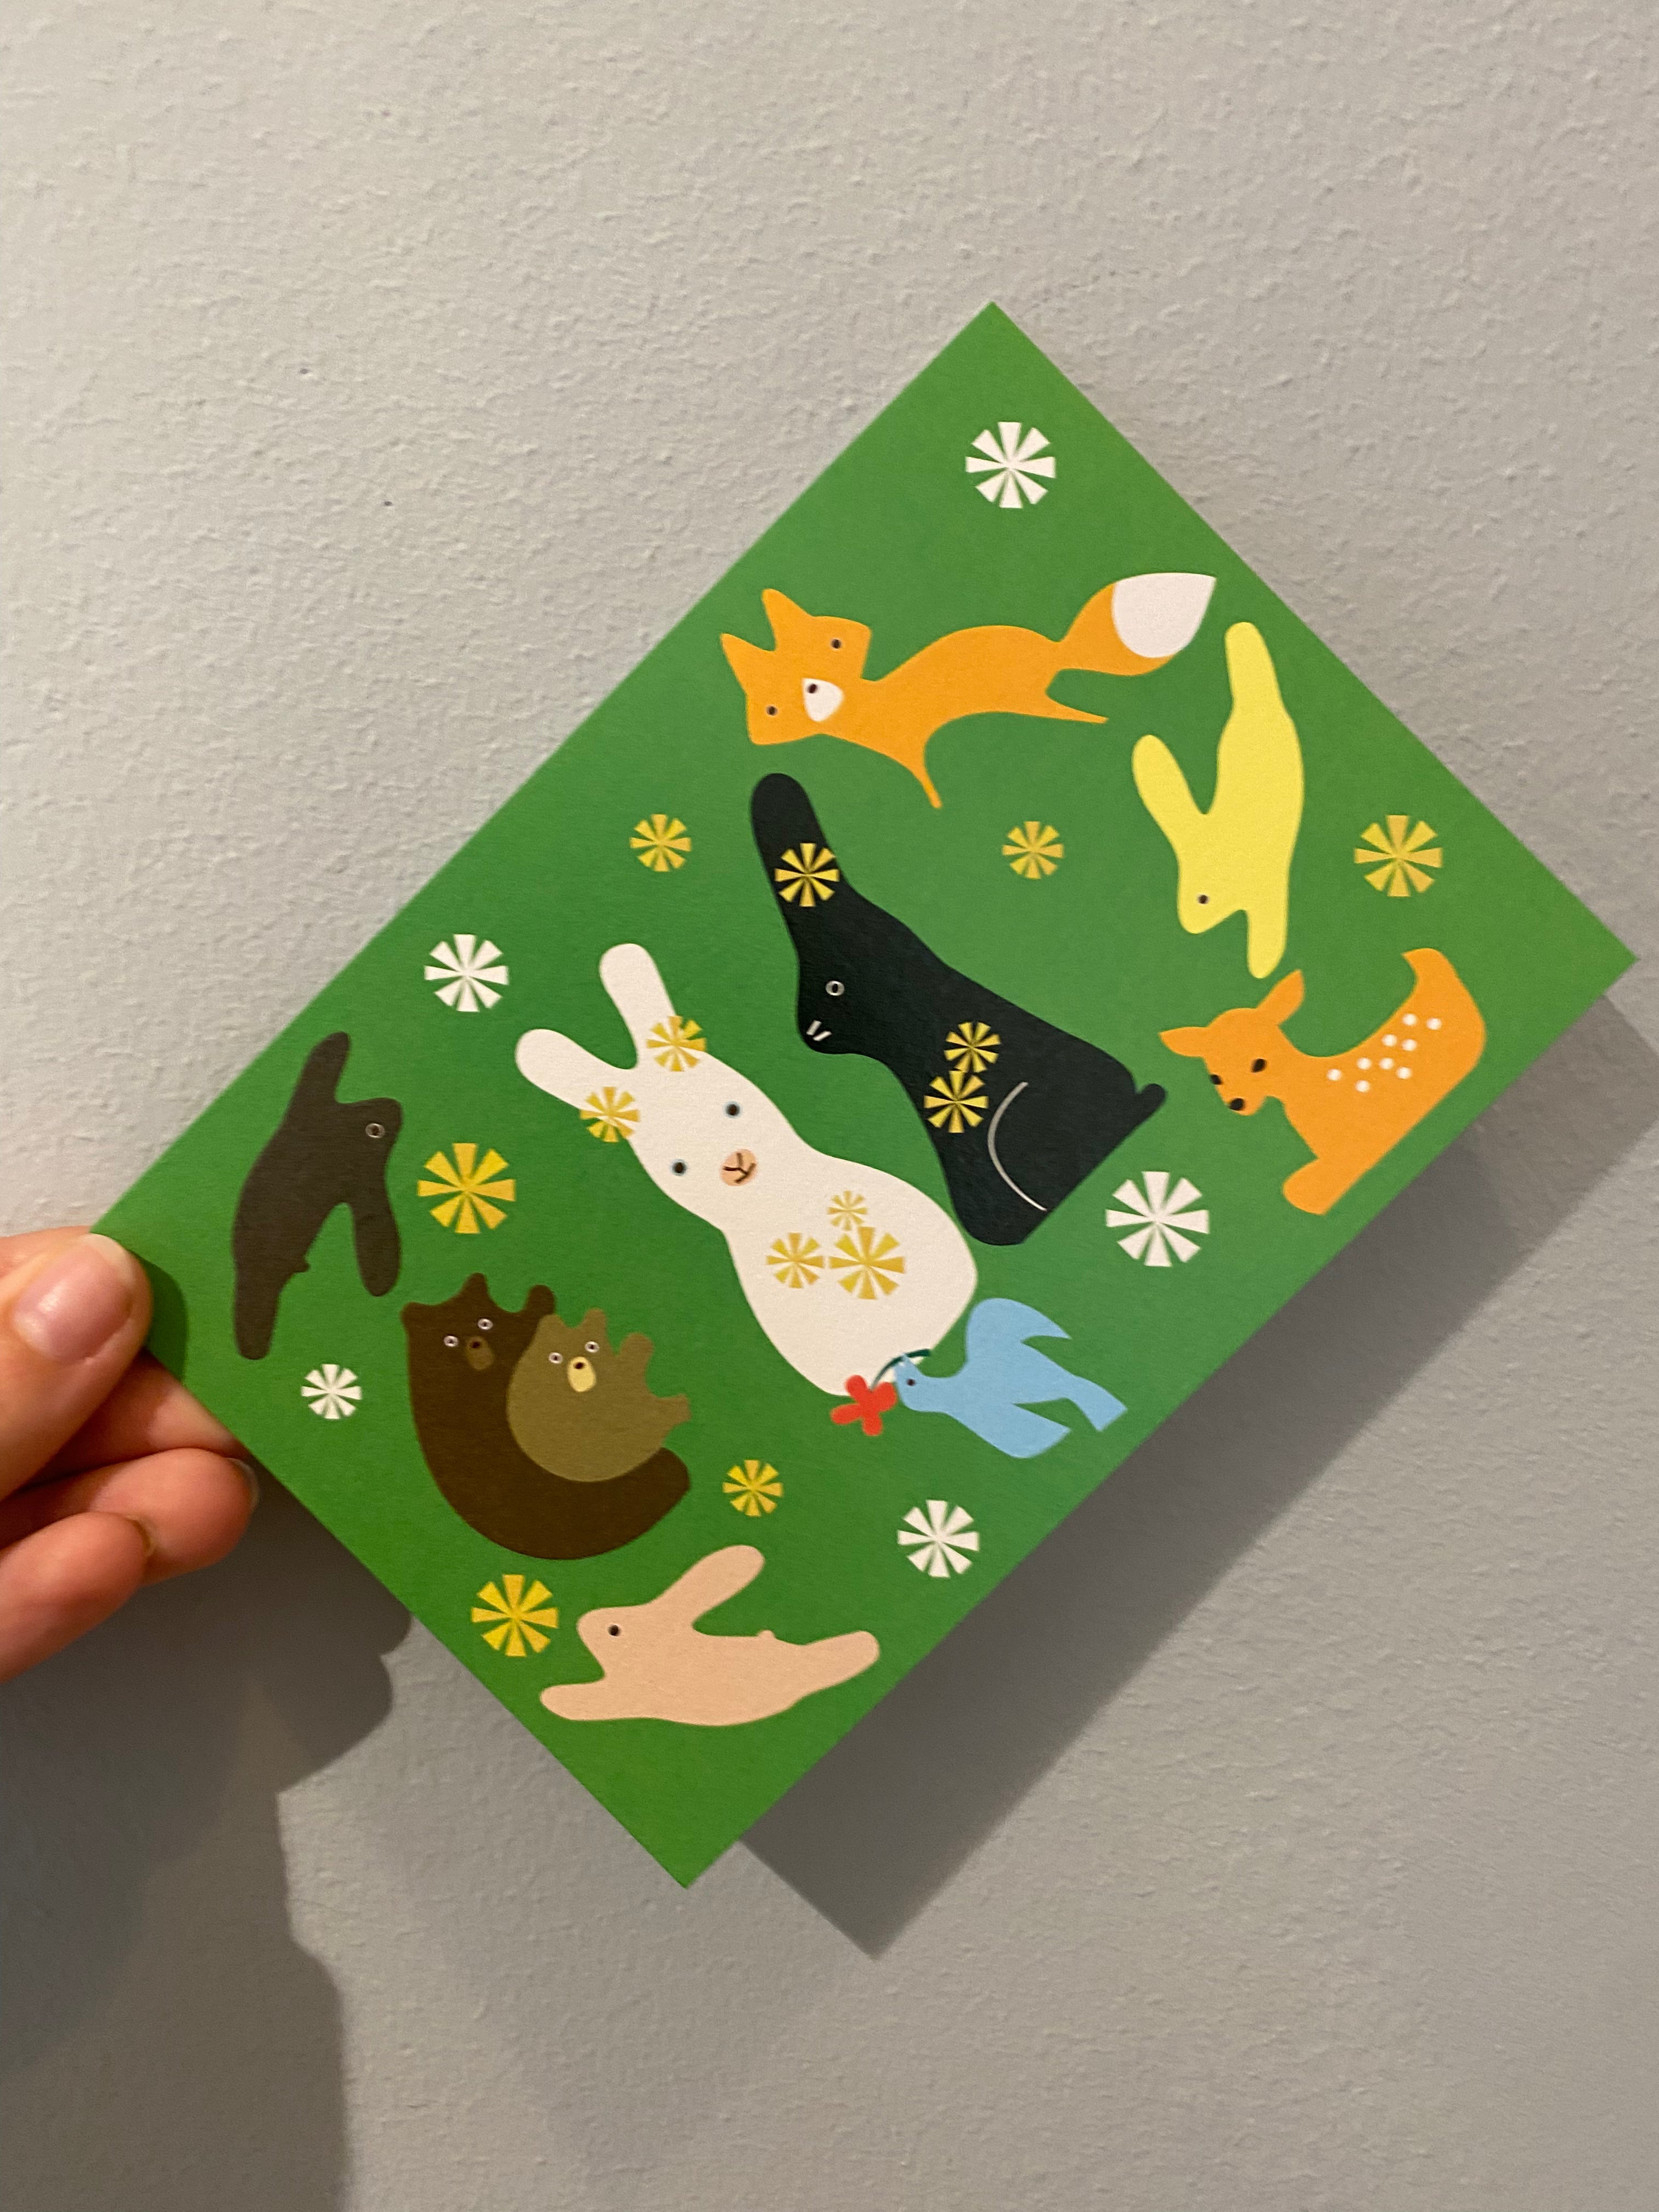 Green card with different animals